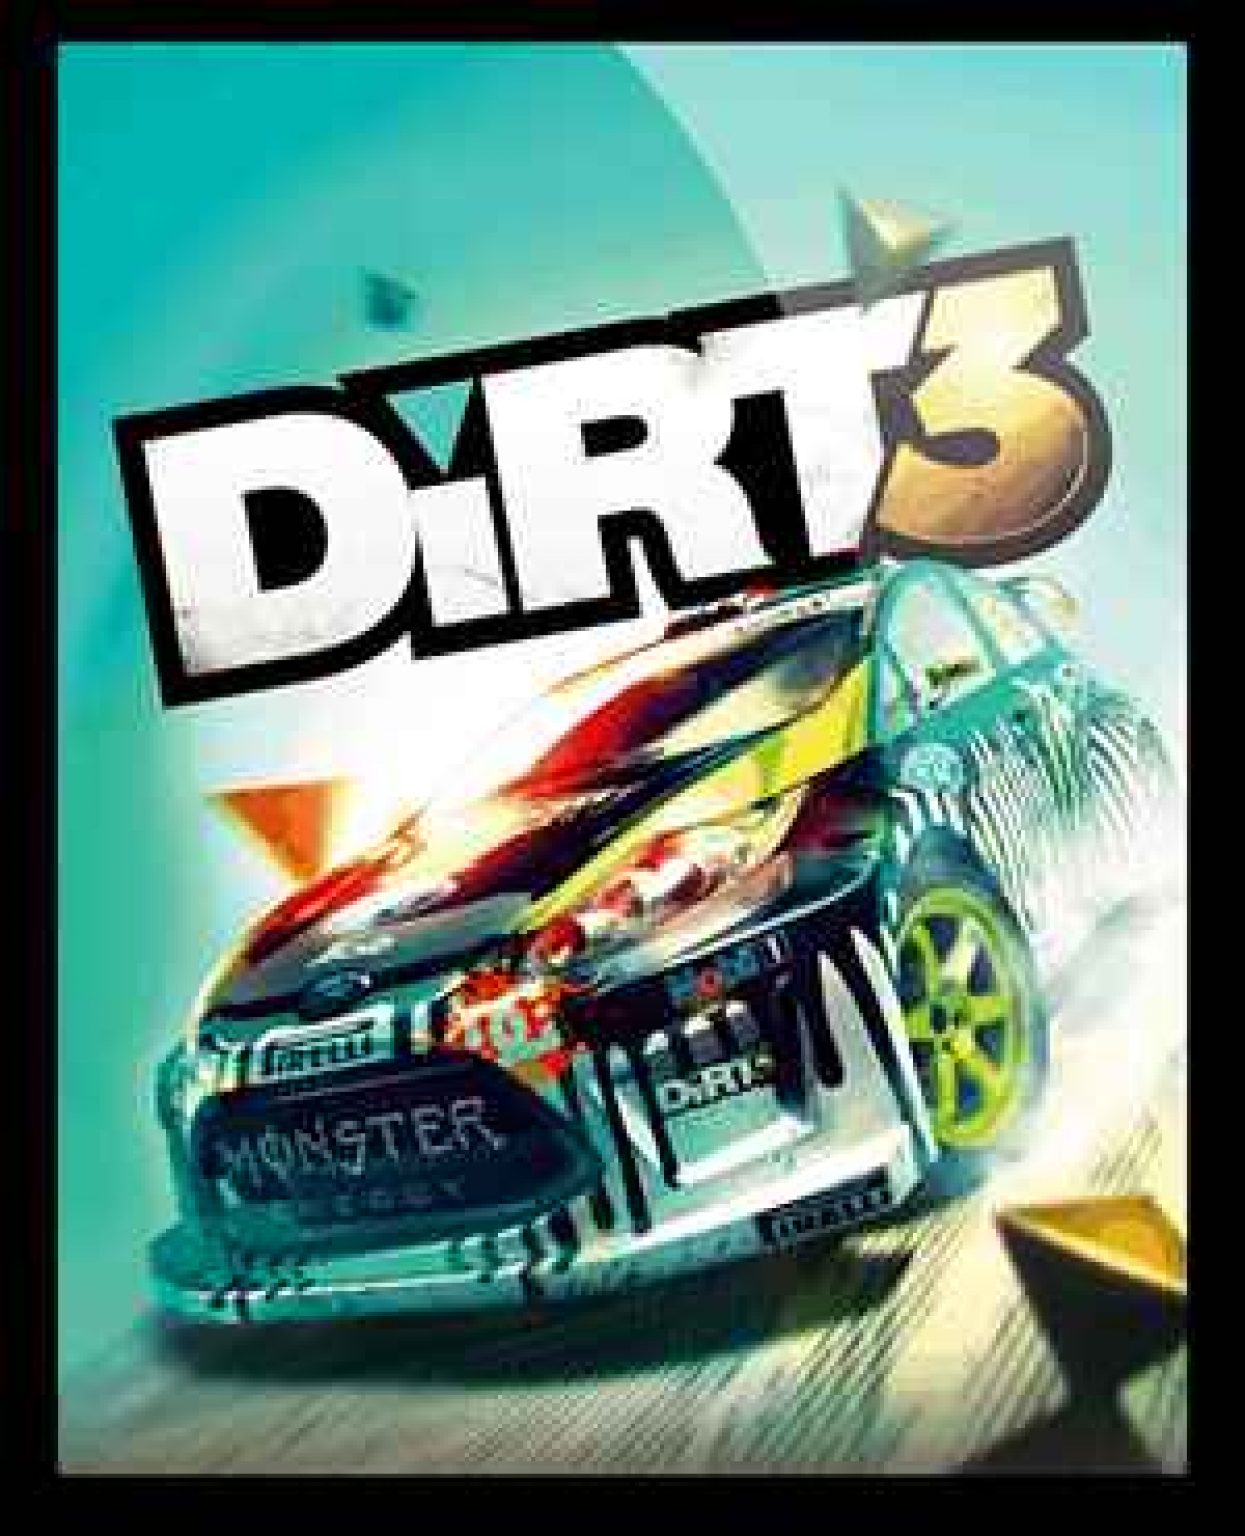 dirt 3 pc save game